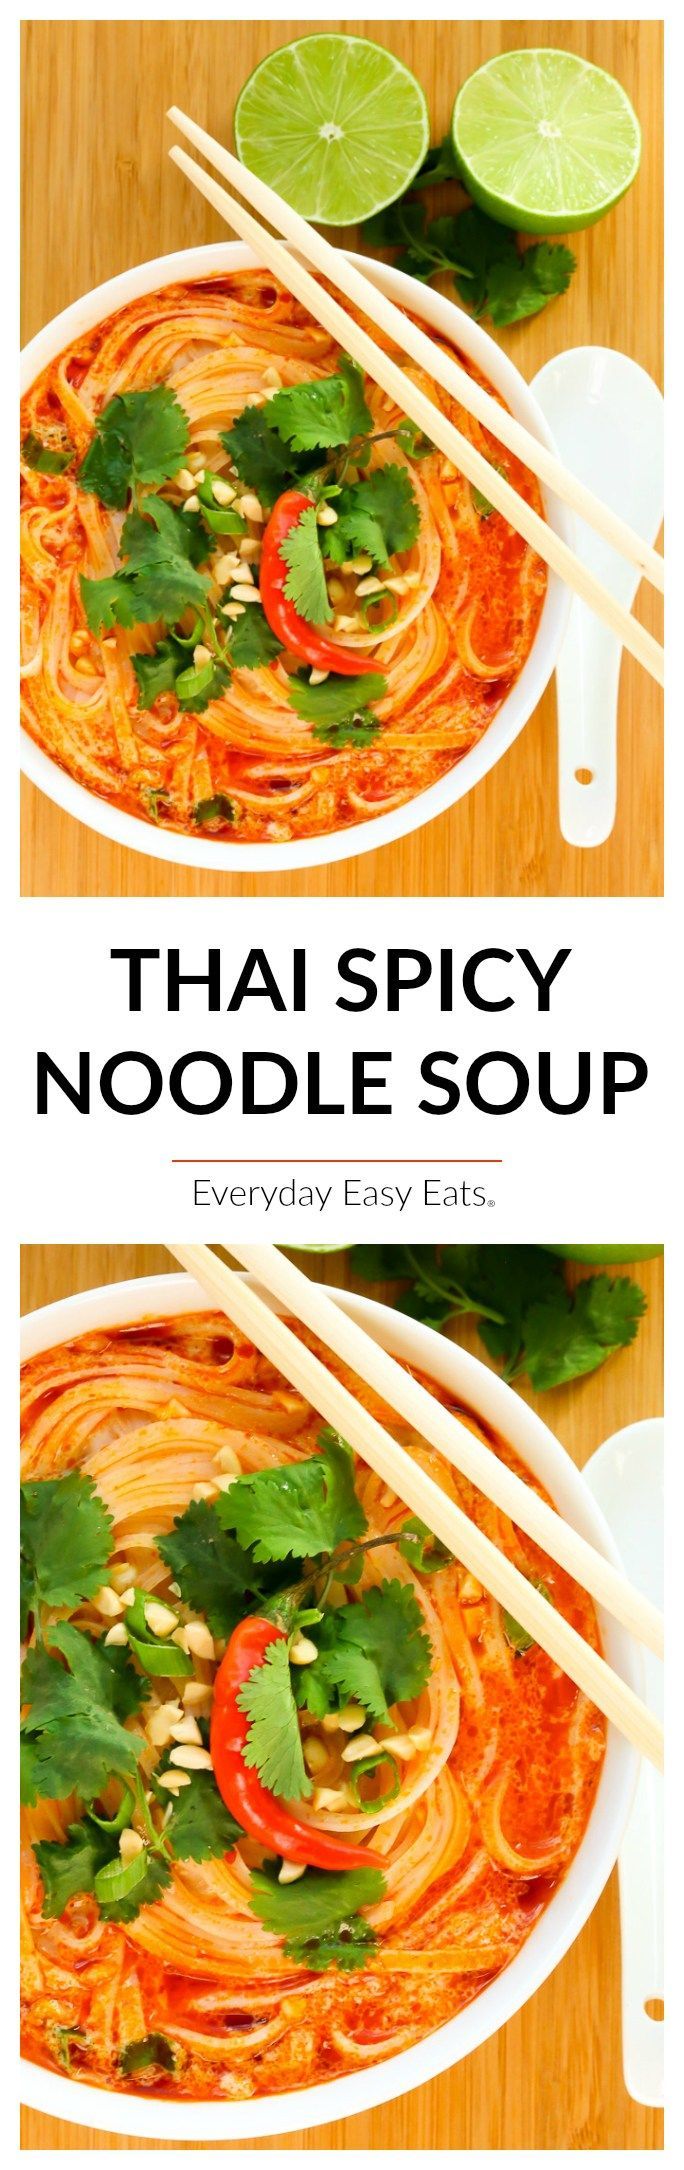 This easy Thai Spicy Noodle Soup recipe is quick, hearty and infused with fragrant Thai flavors. A soul-warming soup that